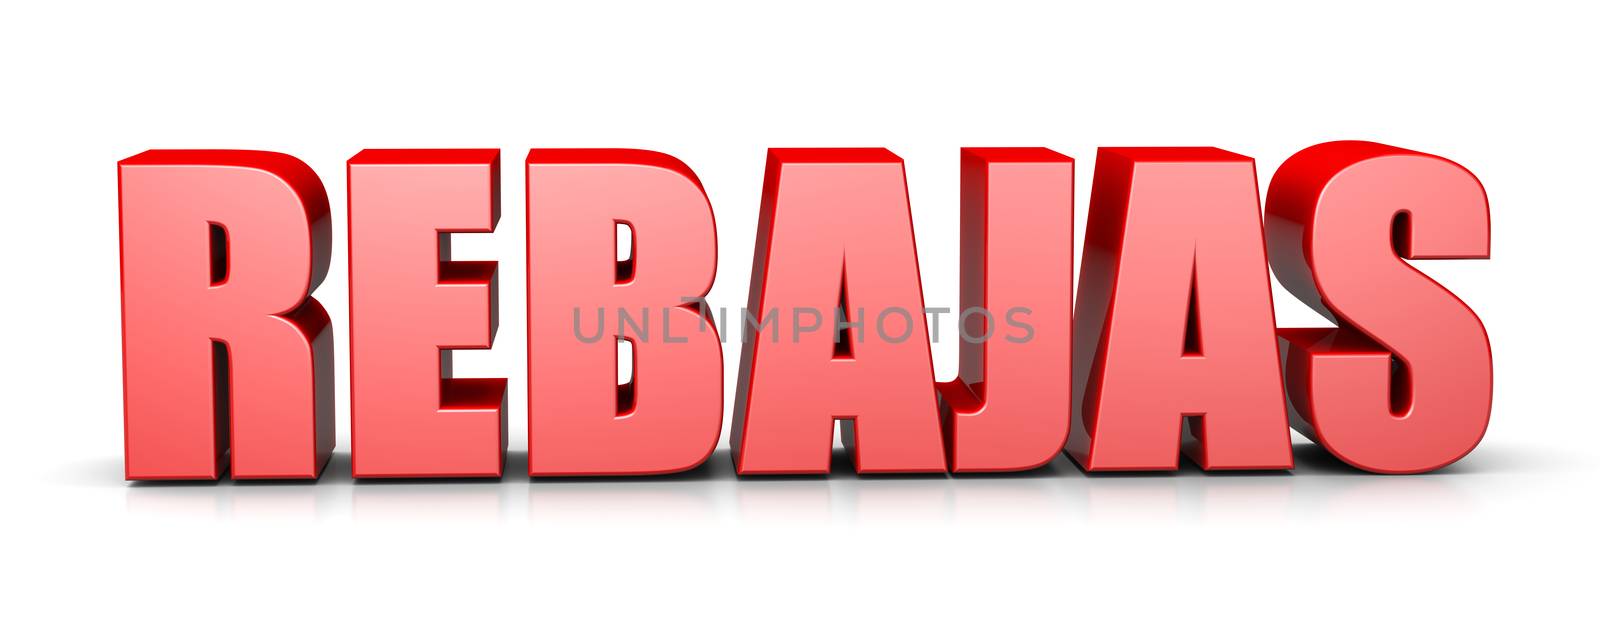 Sales Red 3D Text Spanish Language Illustration on White Background